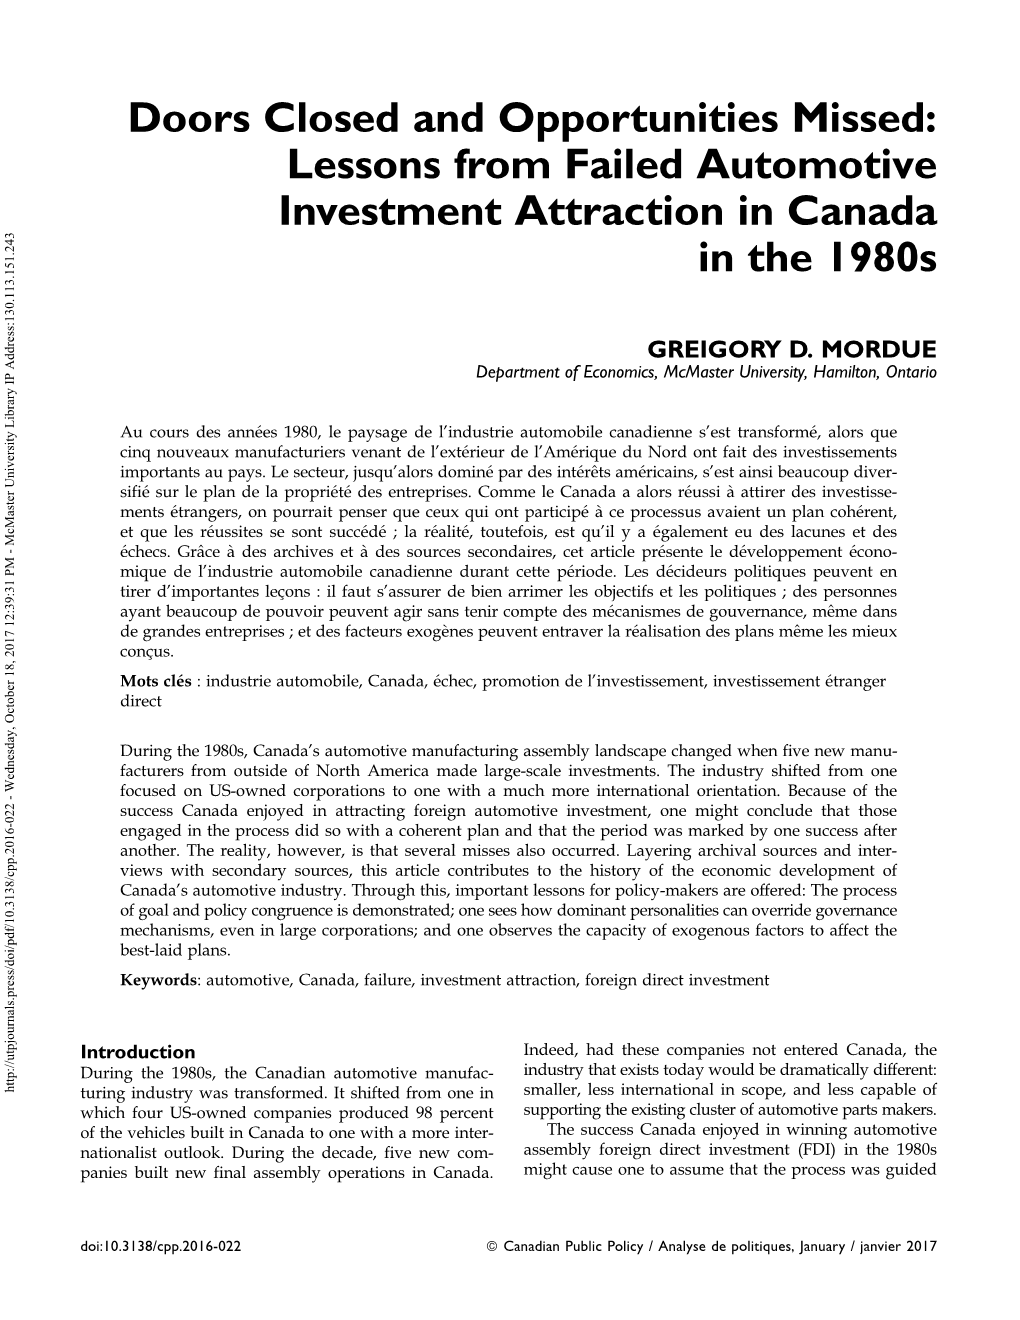 Doors Closed and Opportunities Missed: Lessons from Failed Automotive Investment Attraction in Canada in the 1980S